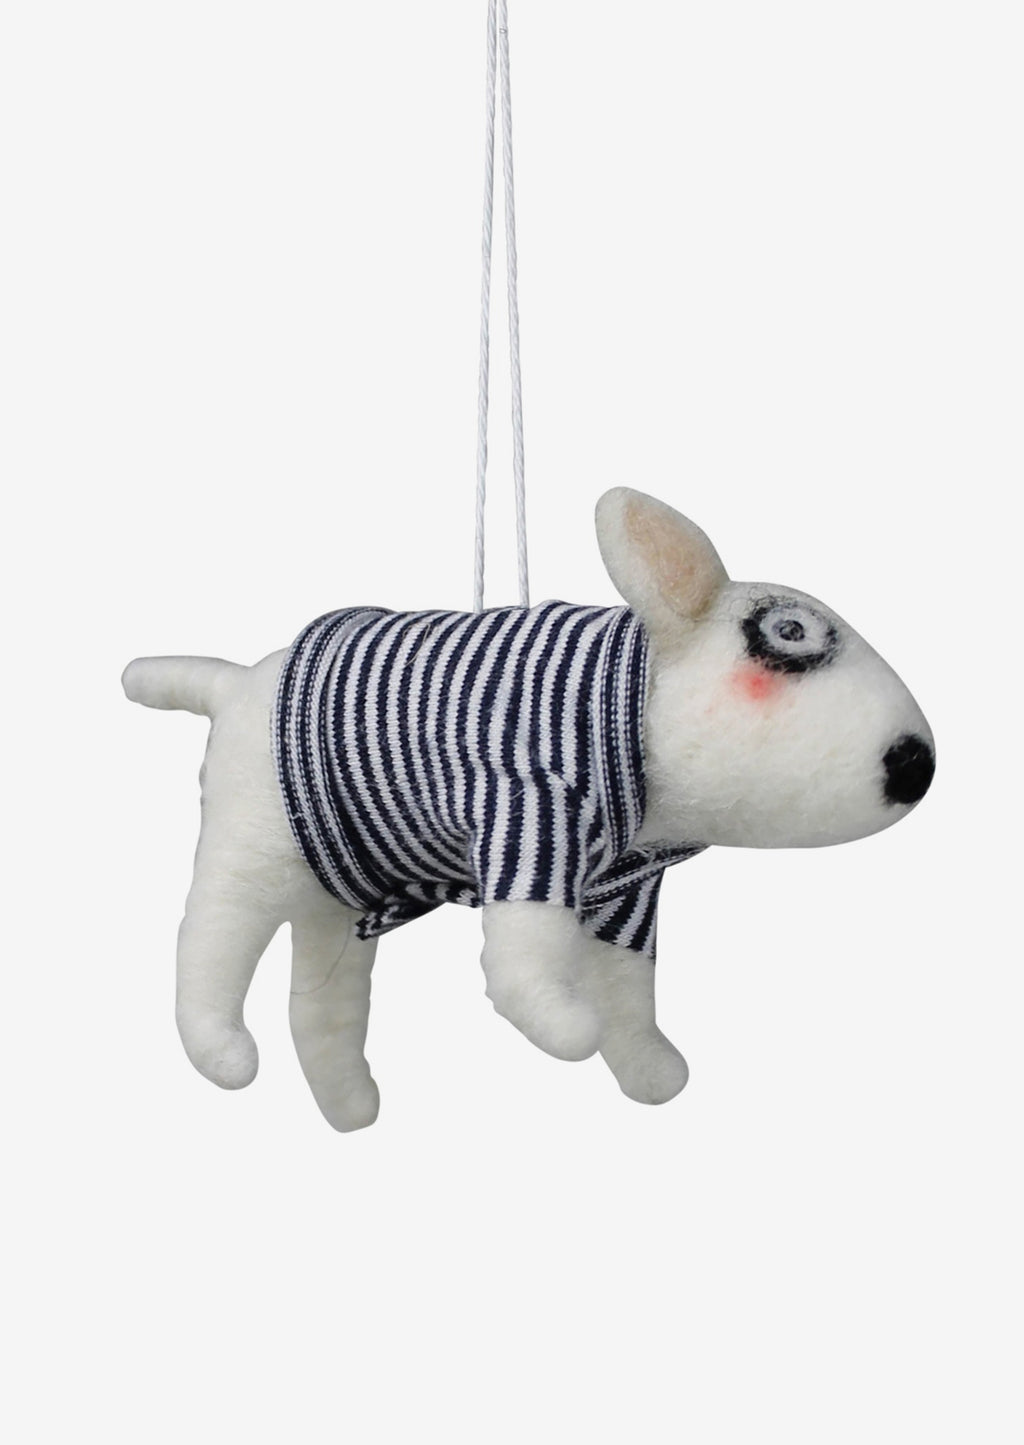 2: A felted holiday ornament of a white dog in a navy striped sweater.